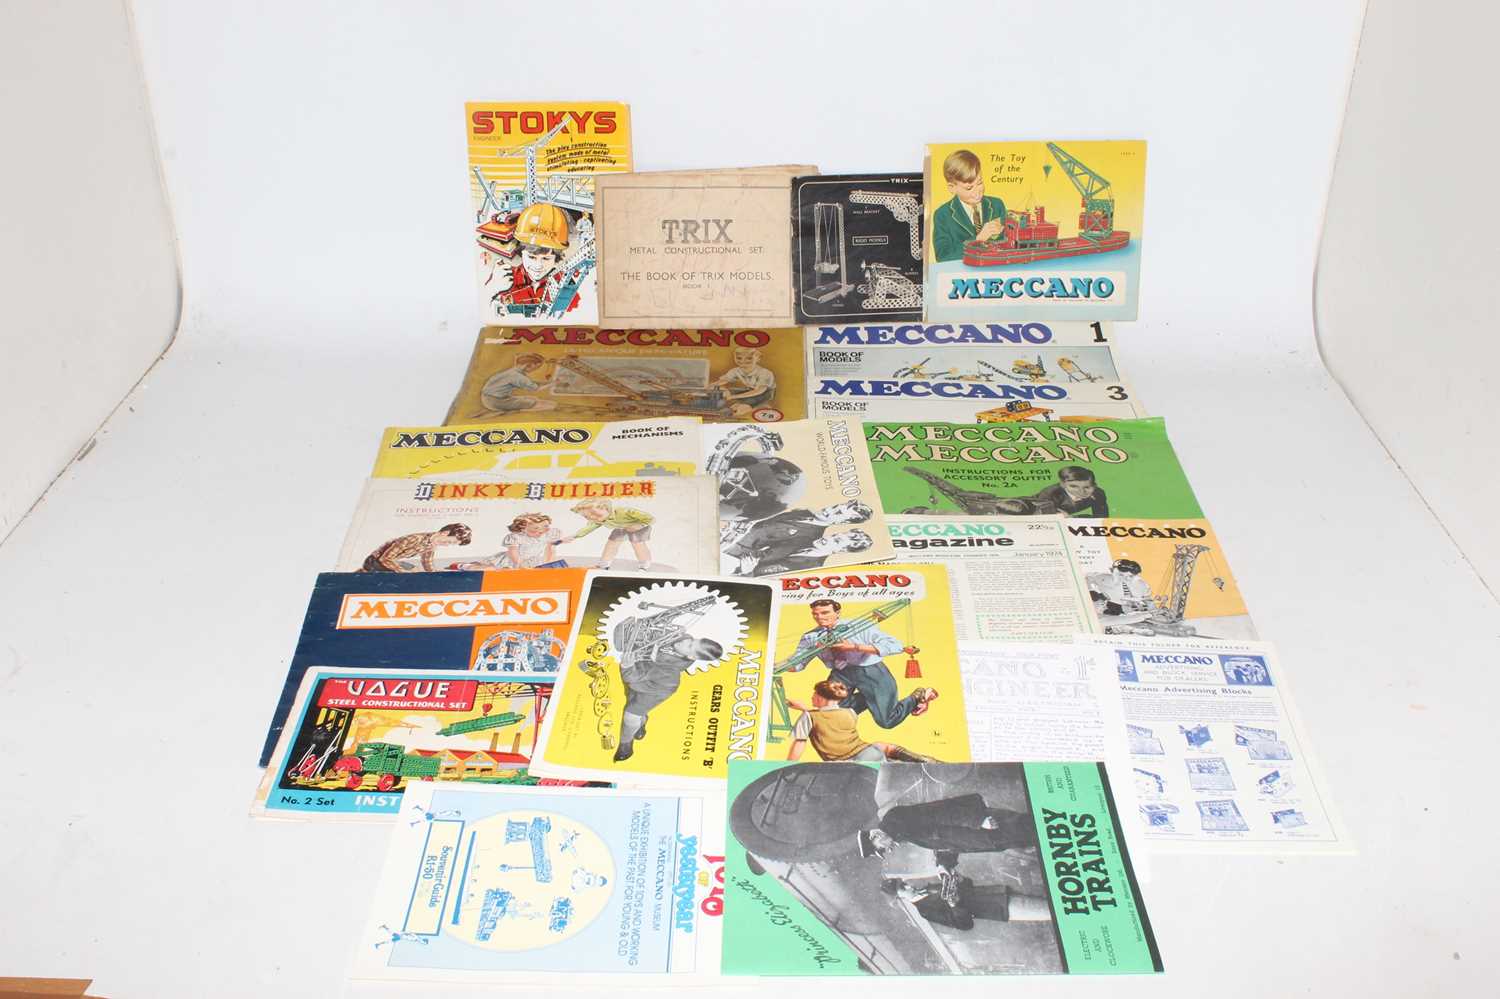 Large quantity of Meccano literature 1920s to 1960s, well used condition - Image 3 of 6